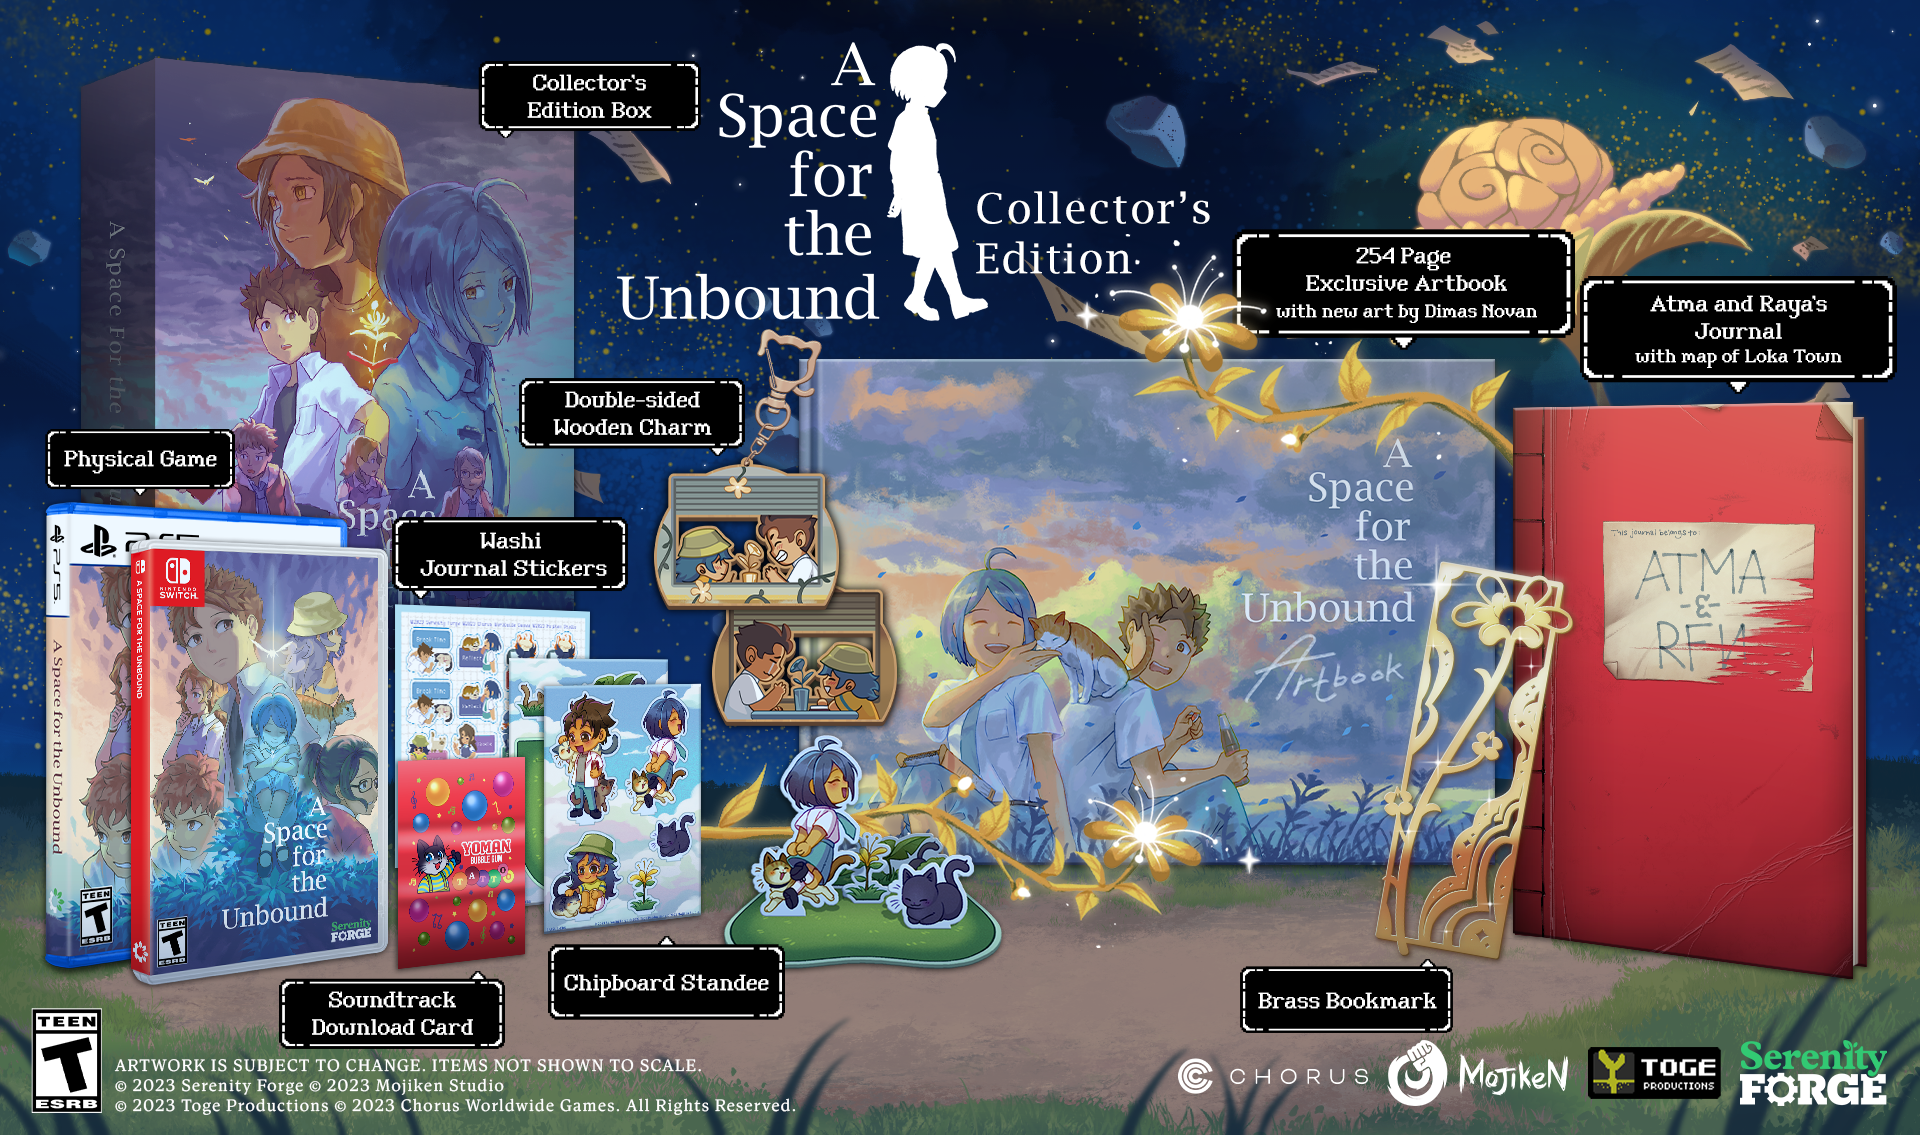 A Space for the Unbound - Collector's Edition